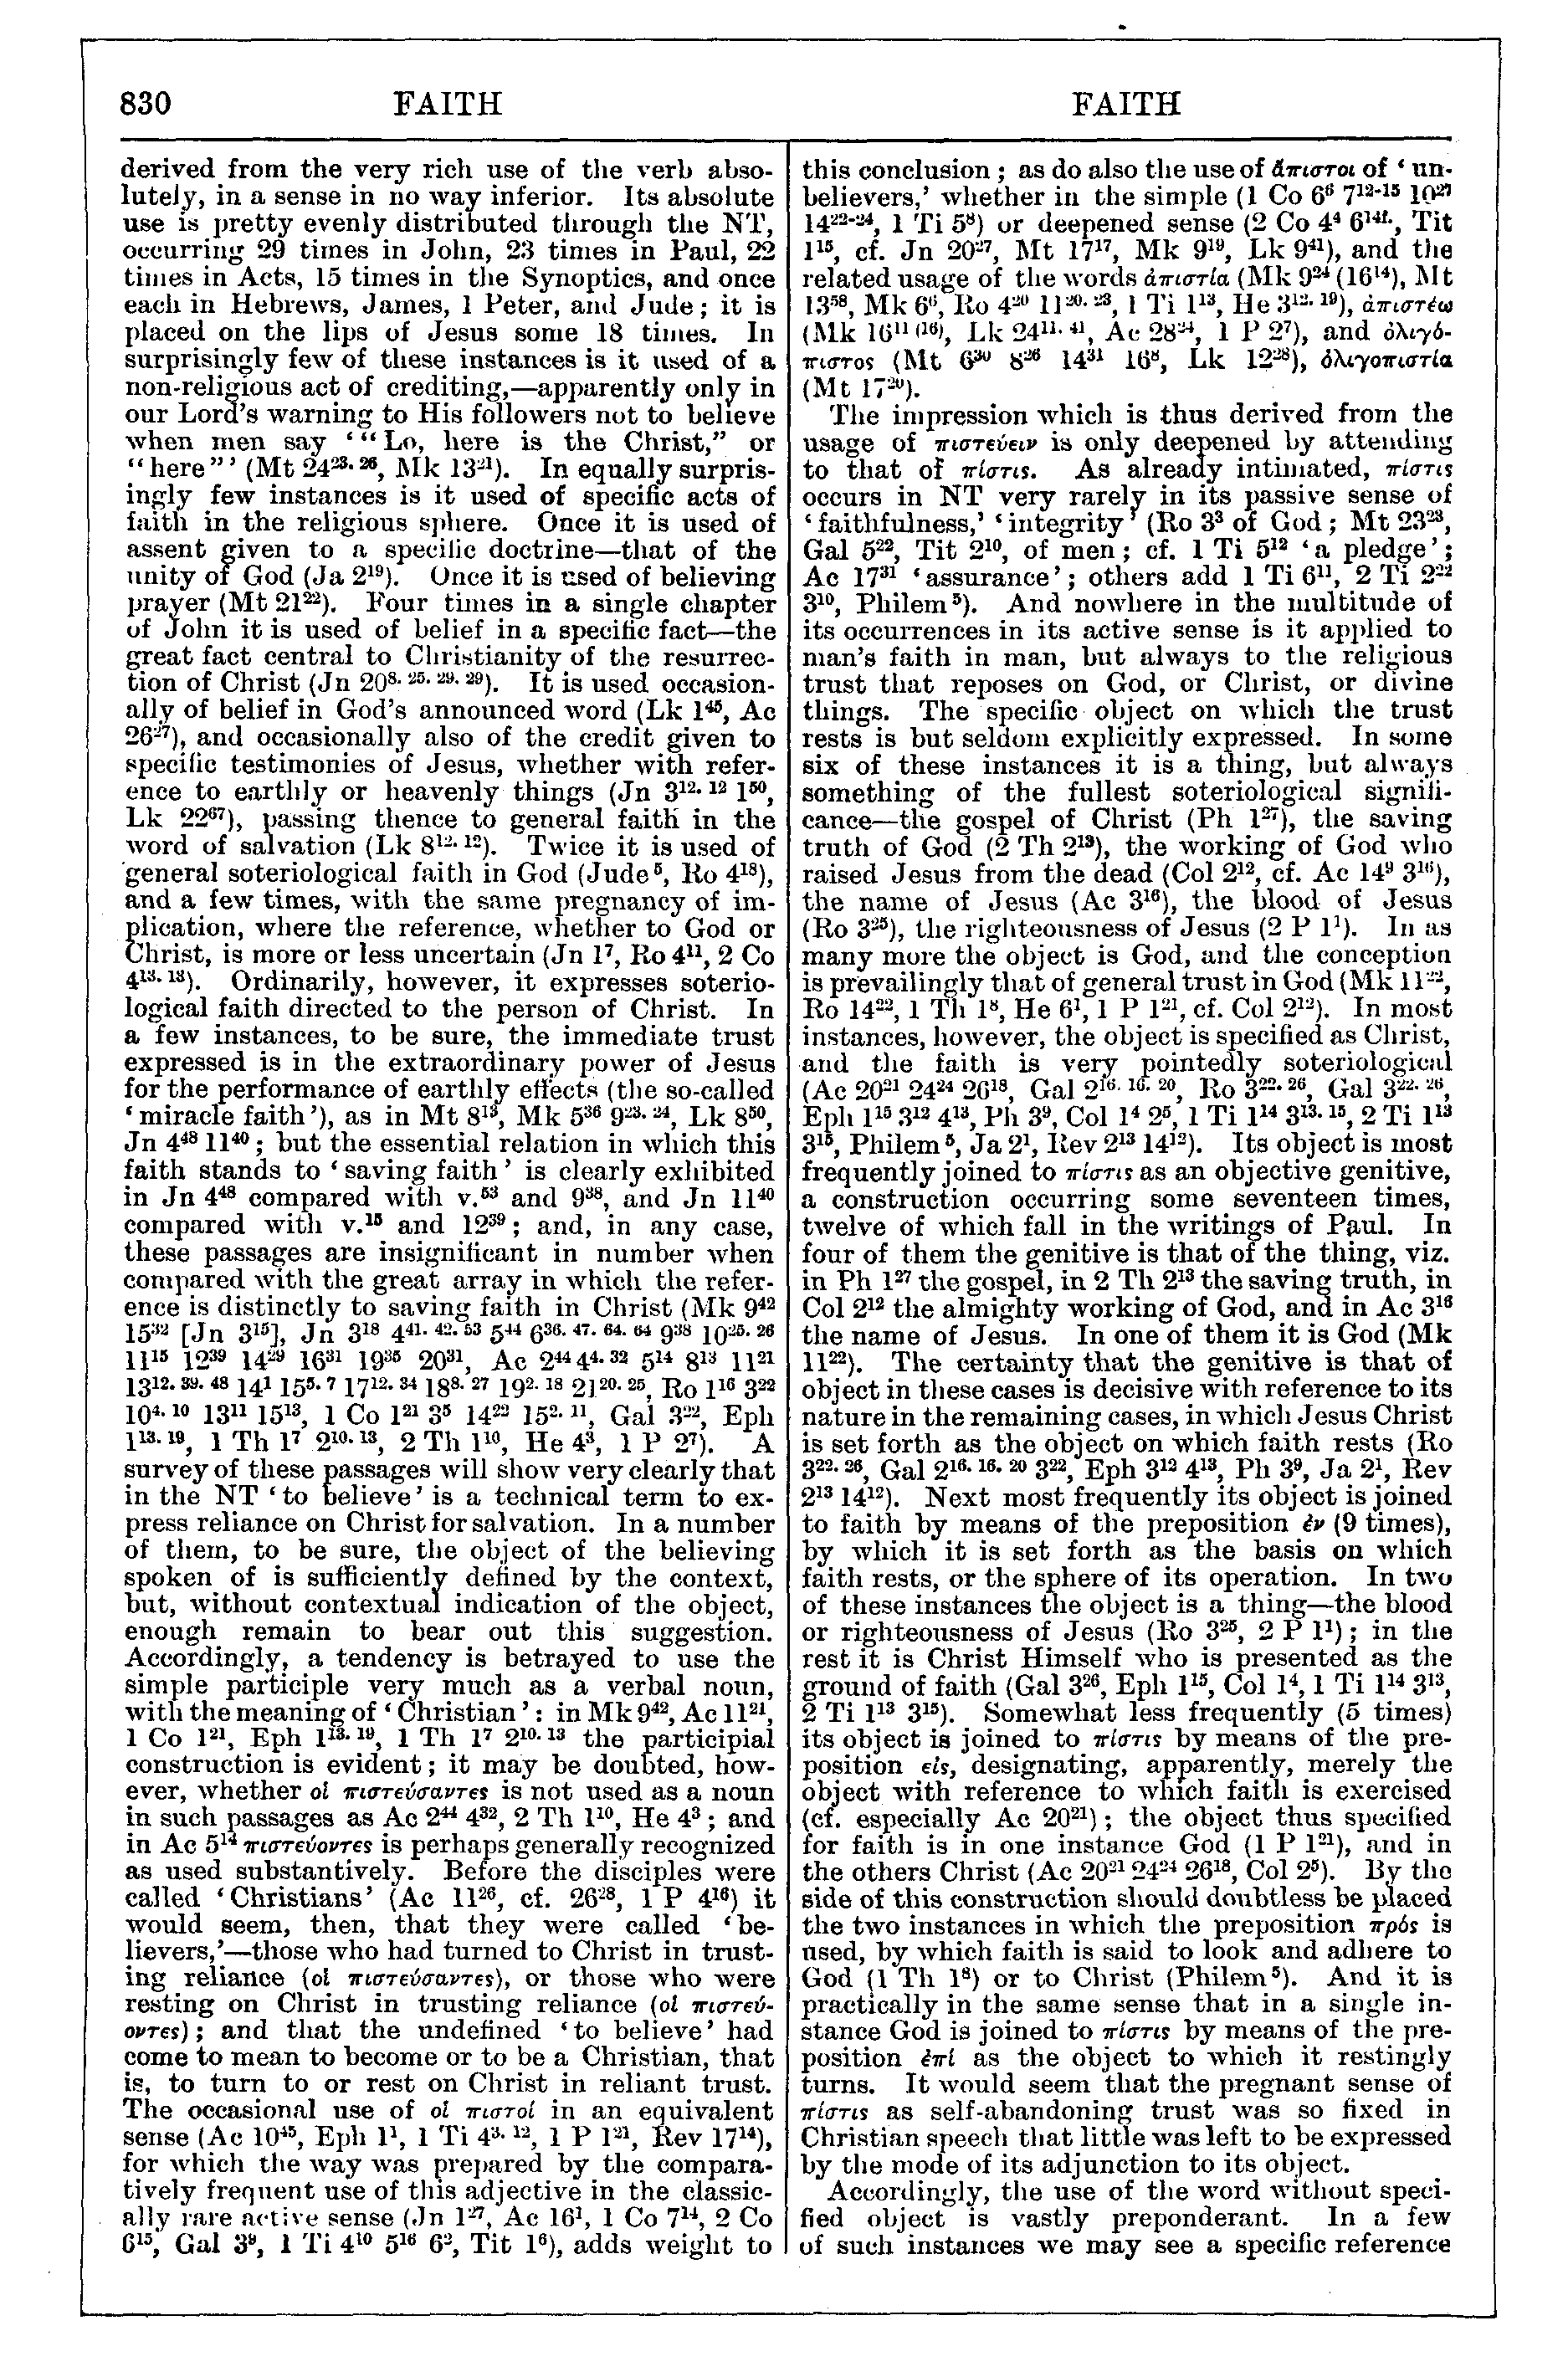 Image of page 830